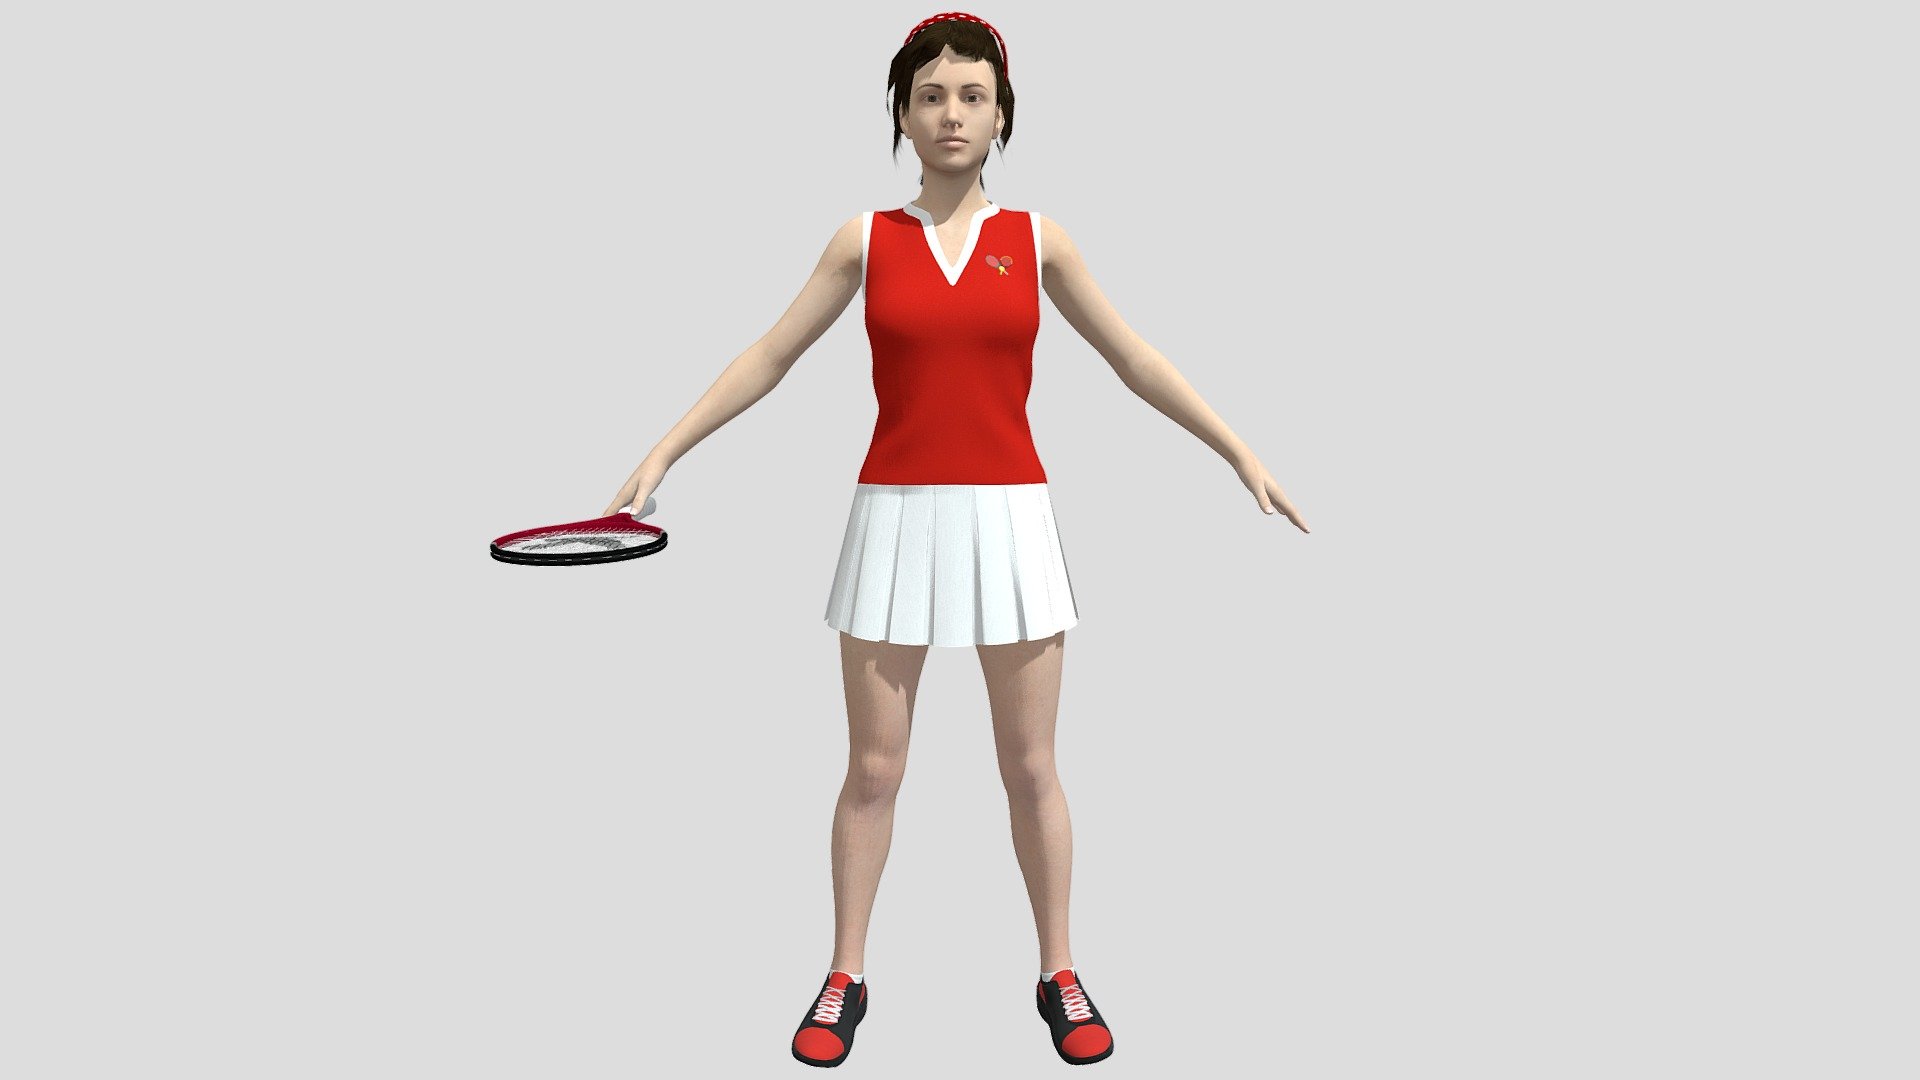 Tennis Player 3D model is a high quality, photo real model that will enhance detail and realism to any of your game projects or commercials. The model has a fully textured, detailed design that allows for close-up renders 3d model